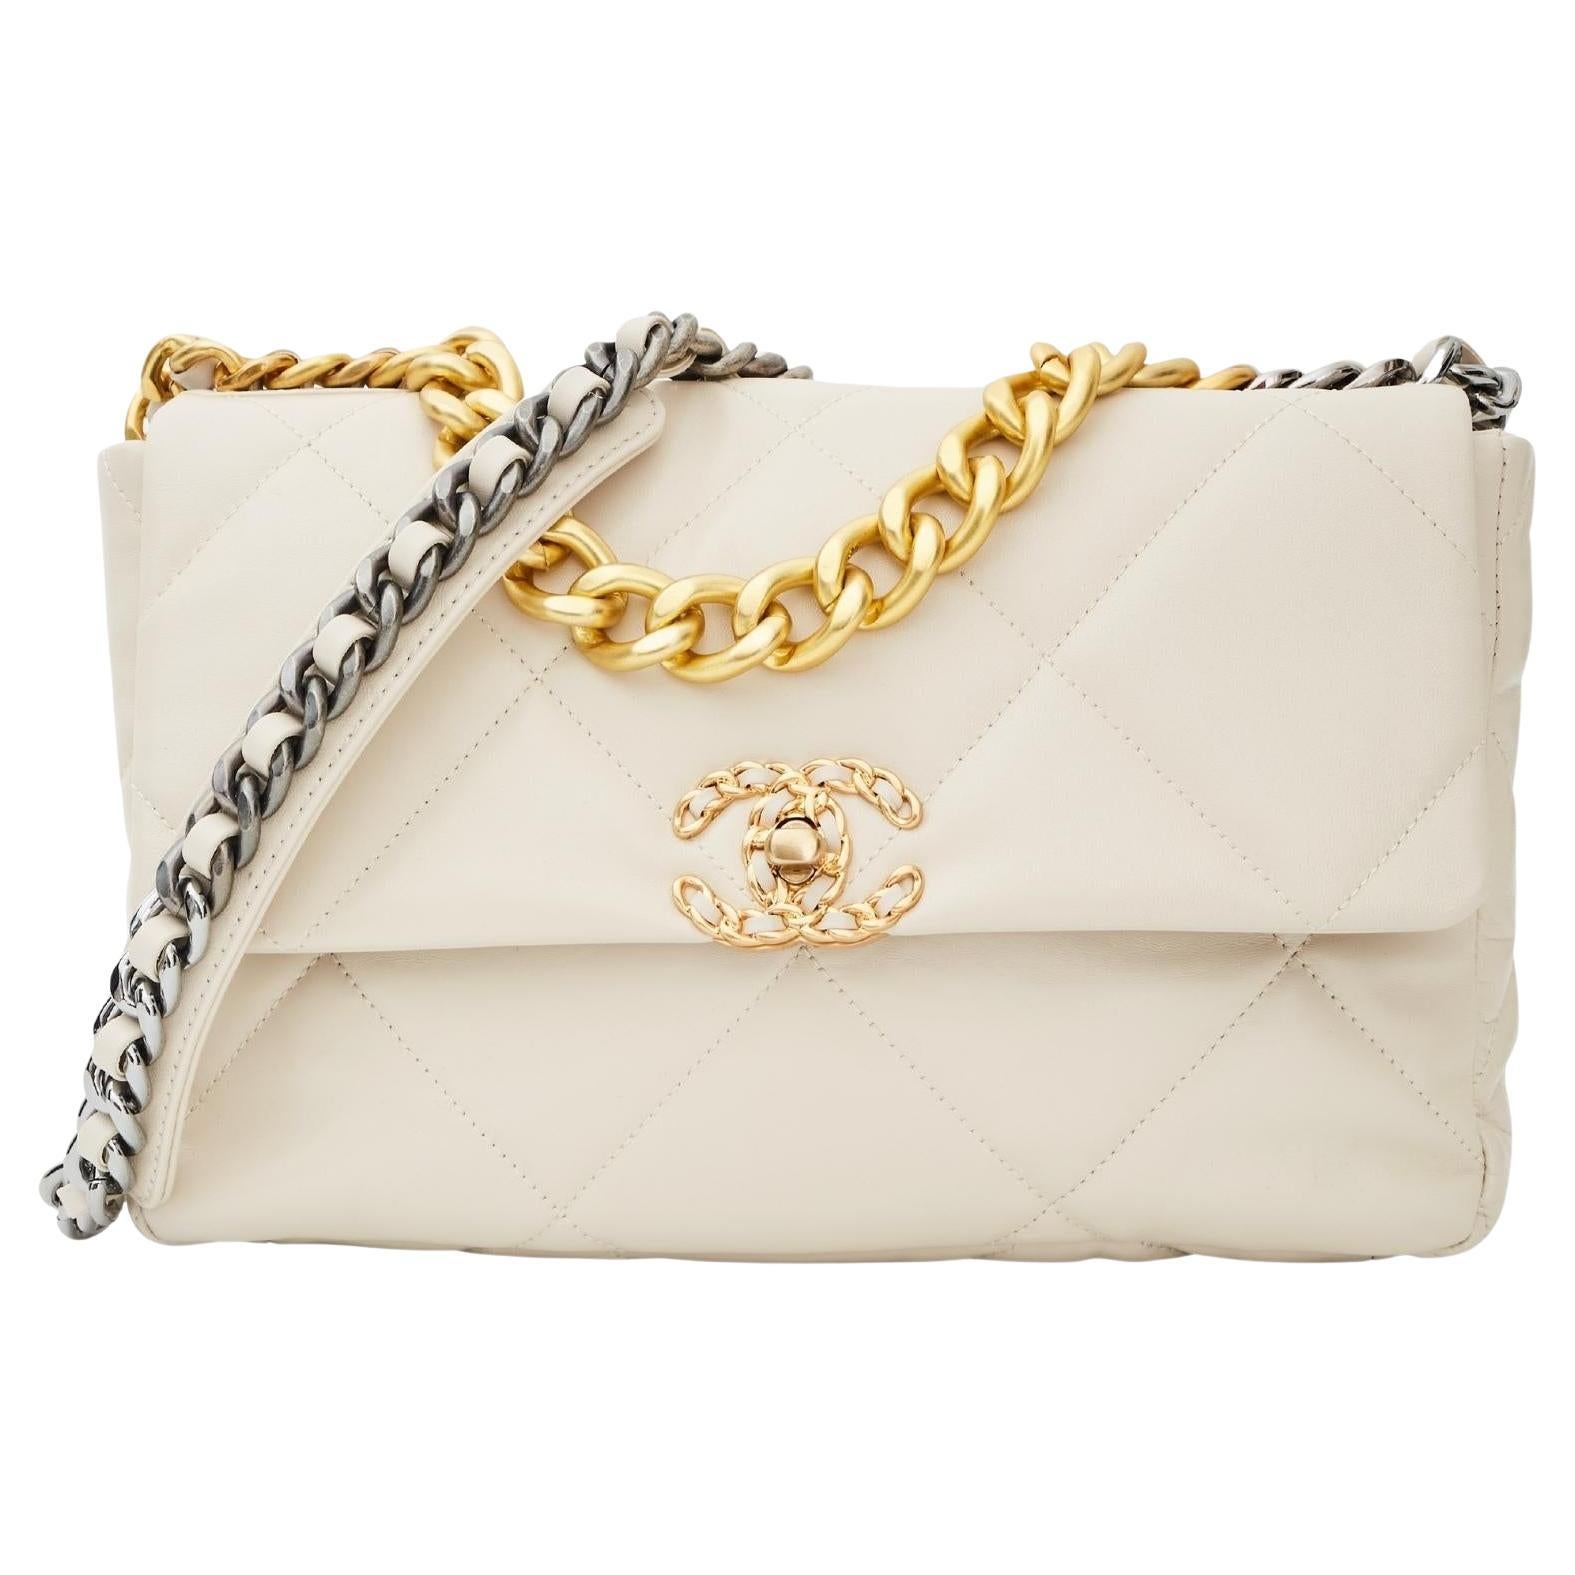 Chanel 19 Large Flap Quilted Leather Shoulder Bag White (2019) at